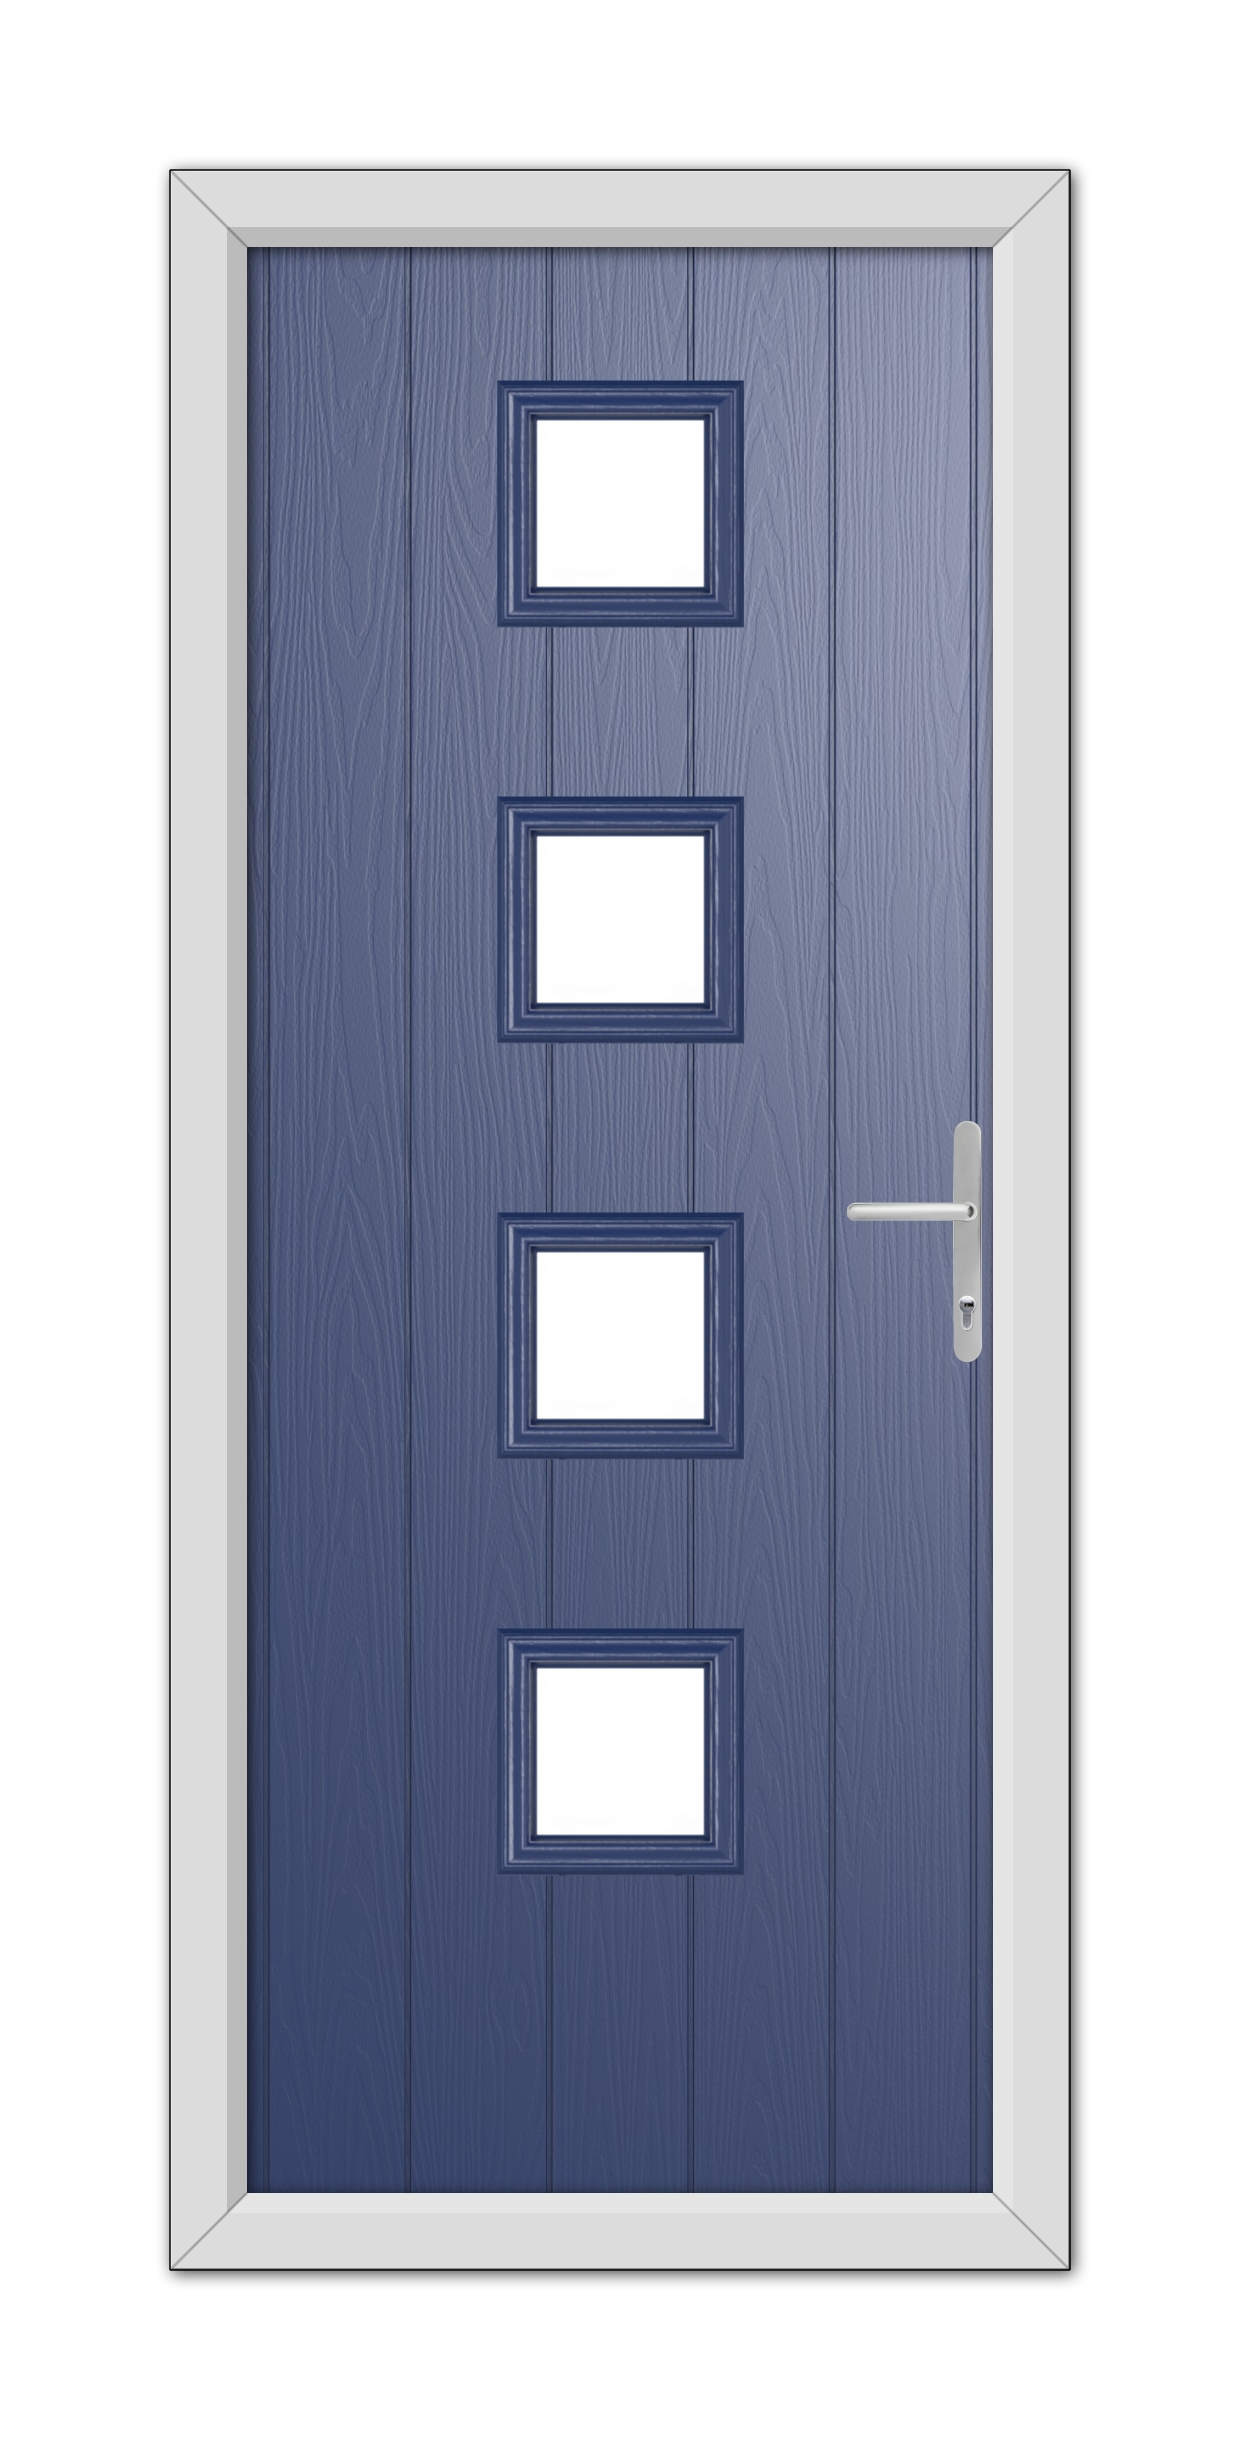 A modern Blue Hamilton Composite Door 48mm Timber Core featuring a white frame, four rectangular windows aligned vertically, and a metallic handle on the right side.